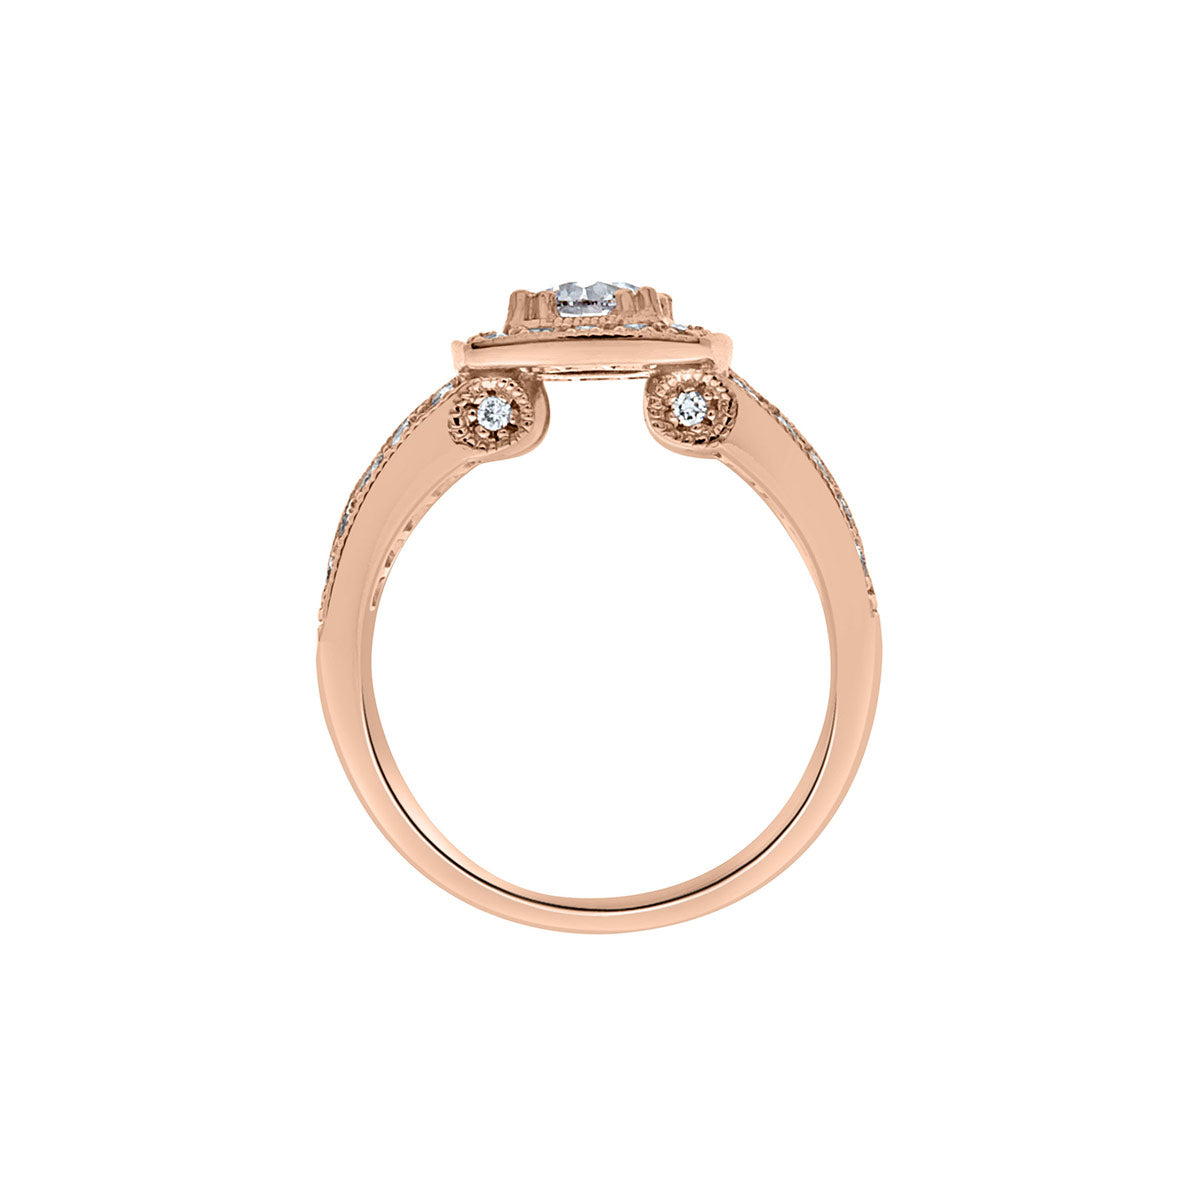 Halo Engagement Ring with Milgrain in rose gold pictured vertical